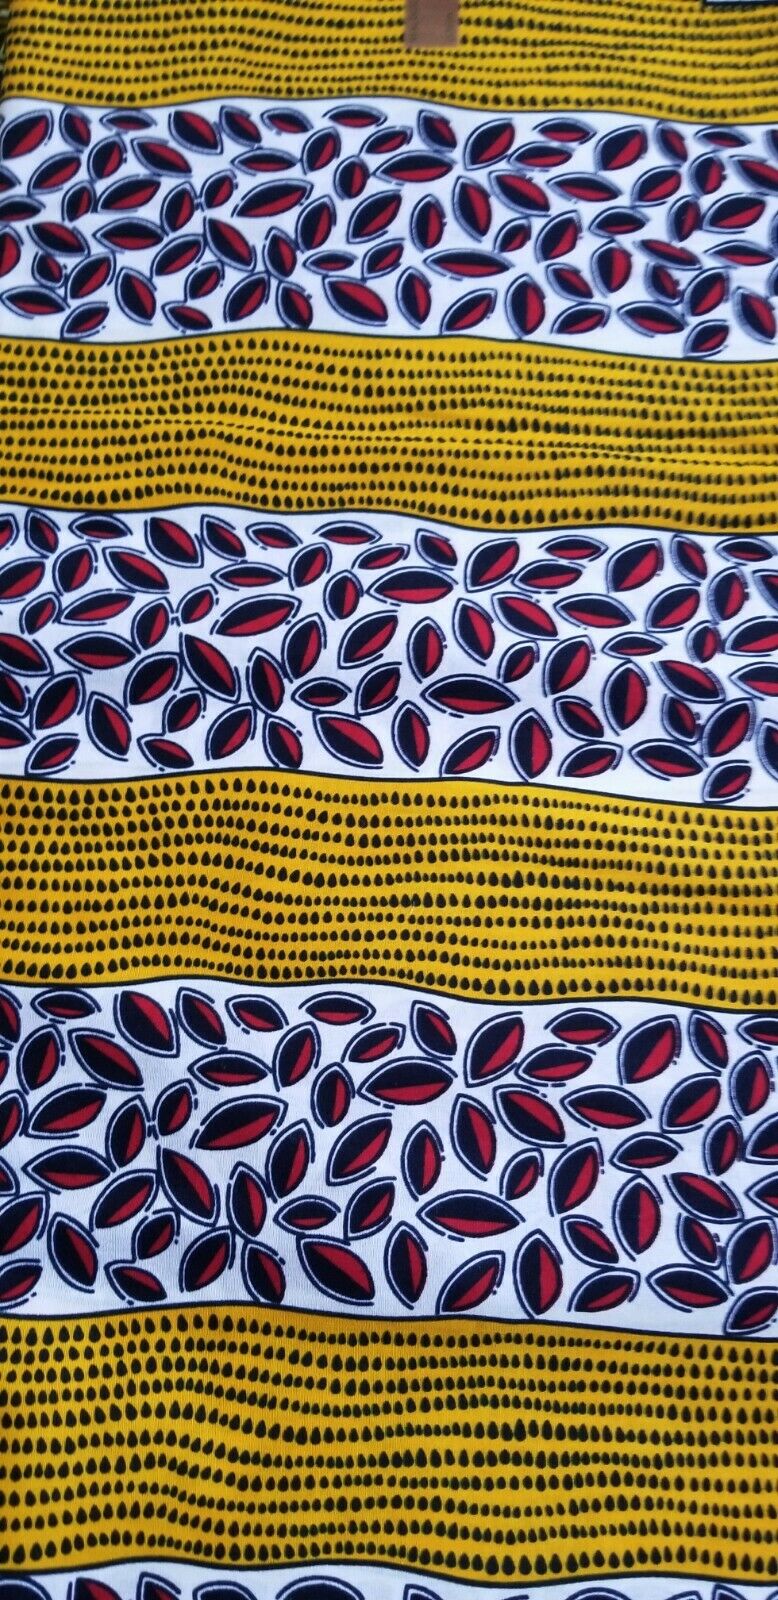 Jungle Fever Multi African fabric 100% Cotton 6 yards~select your choice